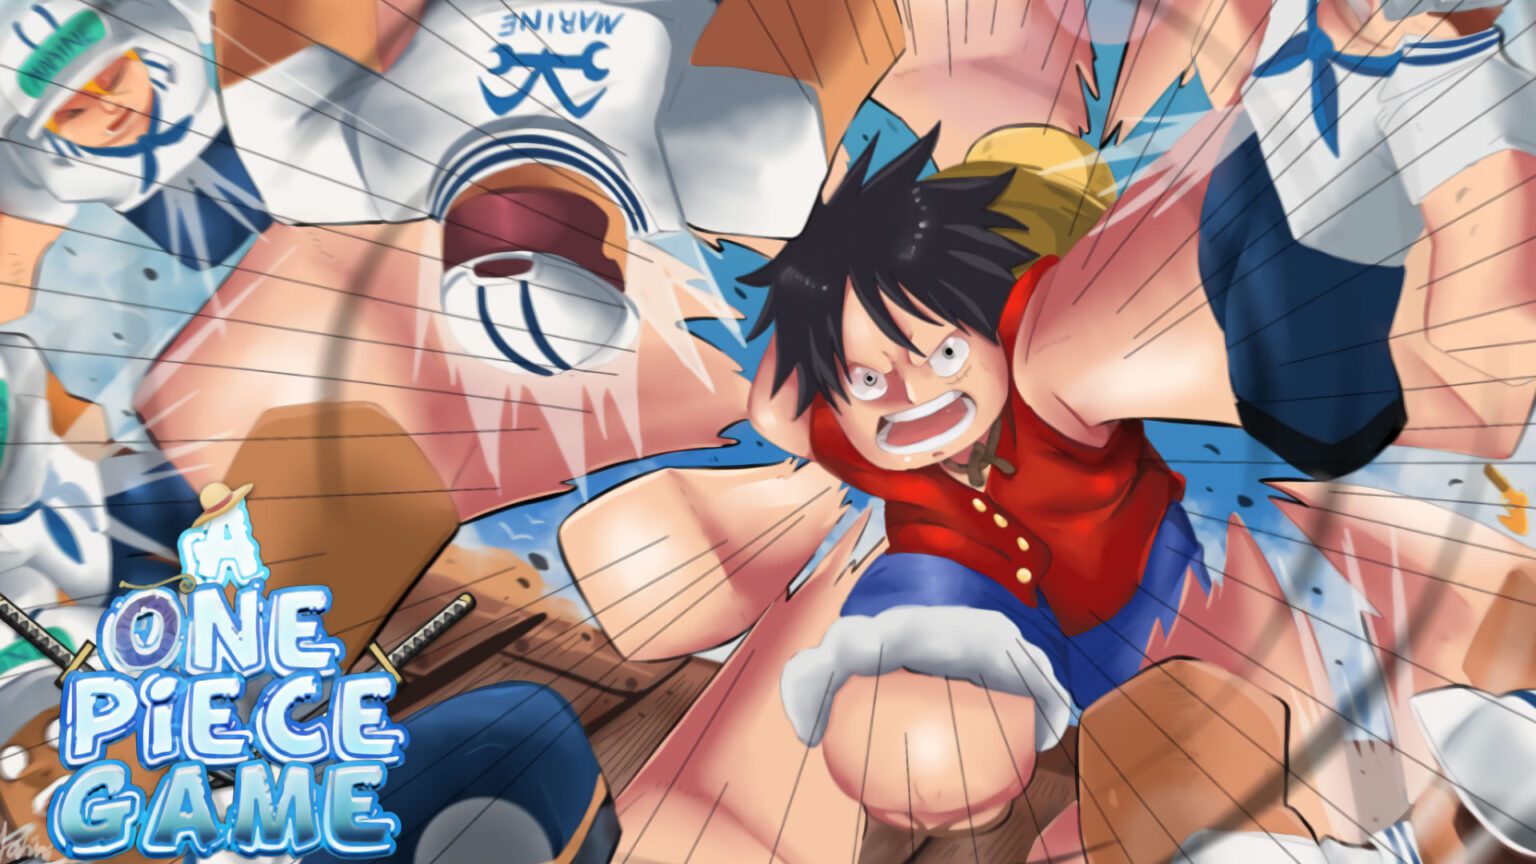 Update 20 of A! One Piece Game!